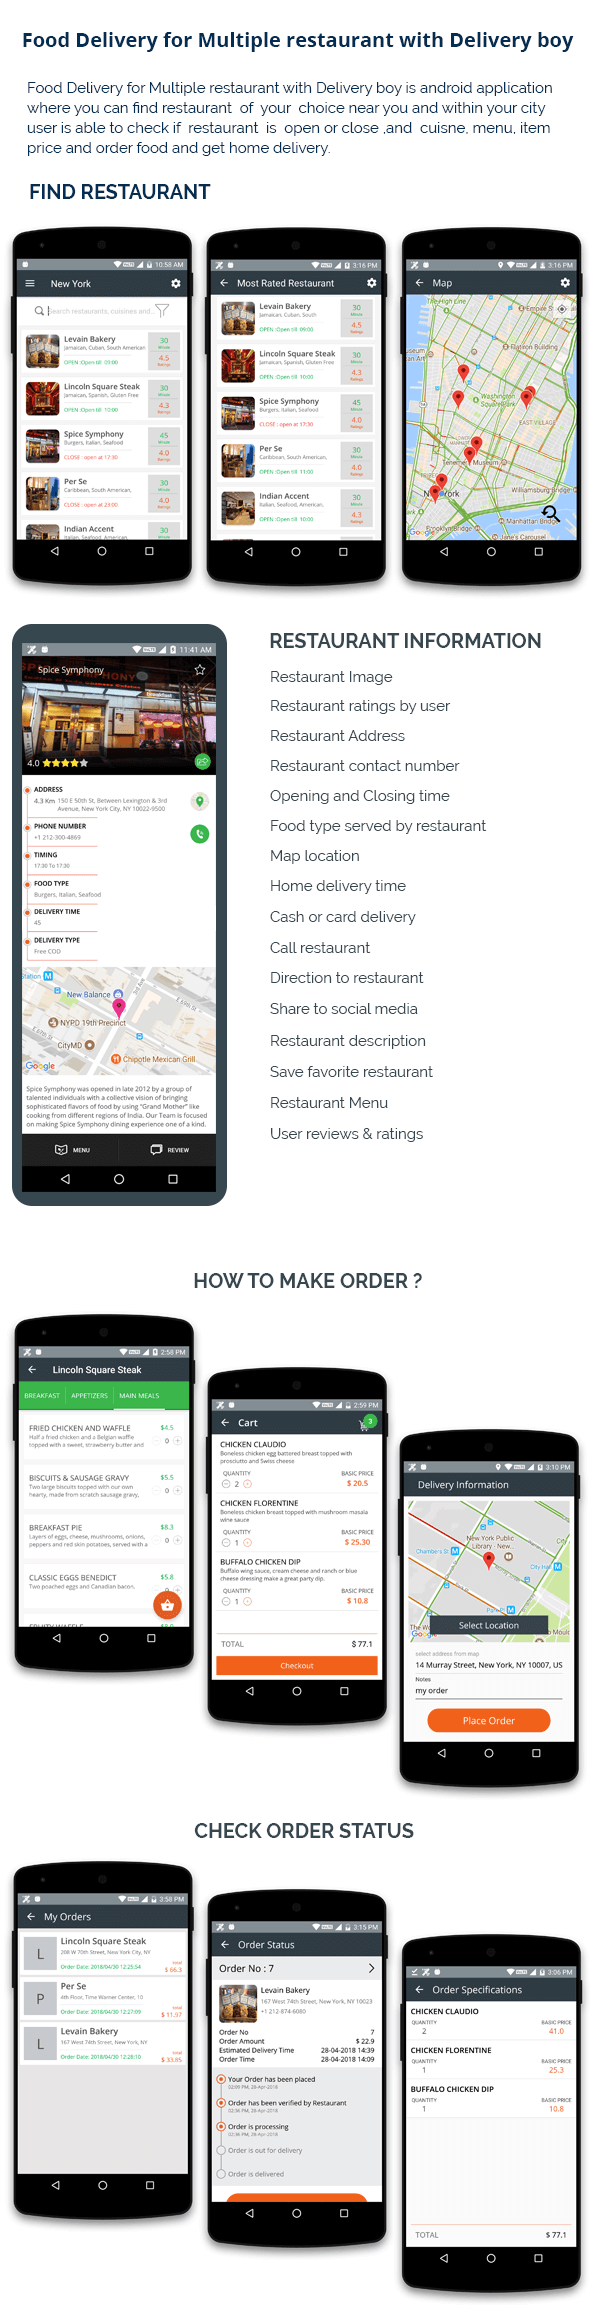 Food Delivery for multiple restaurant with delivery boy android application - 1